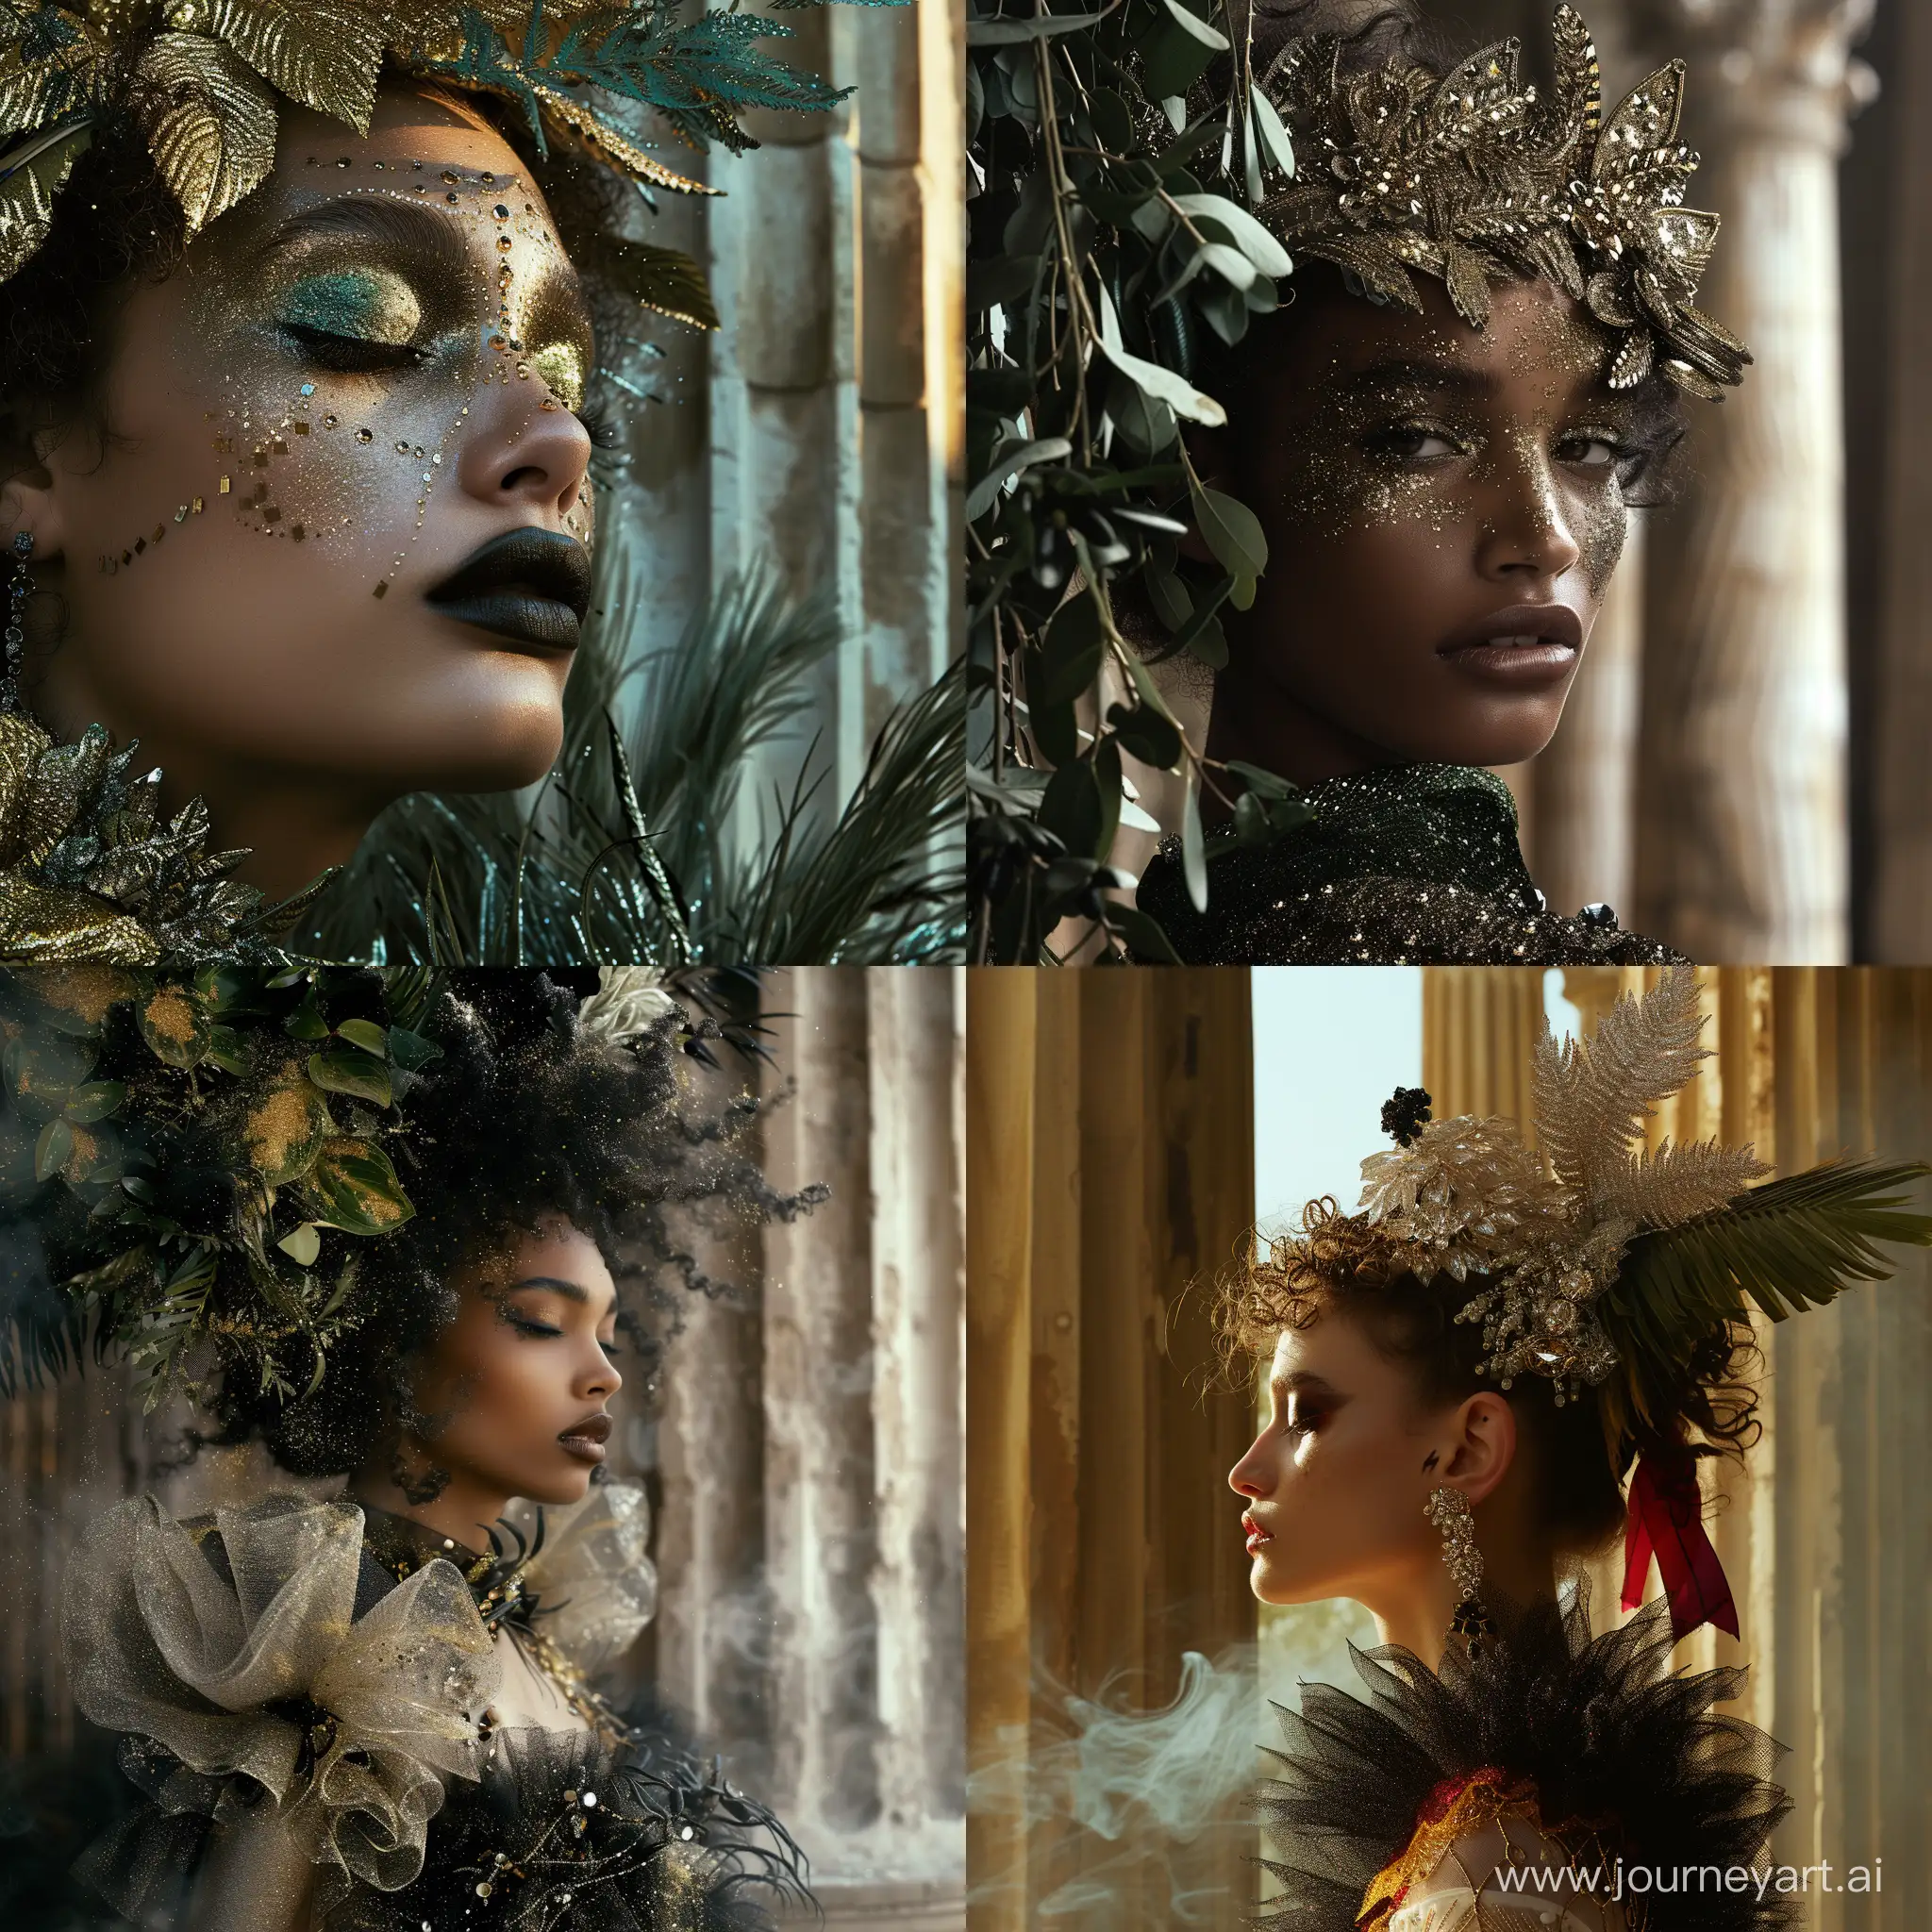 Prima-Fashion-Dynamic-Pose-Amidst-Exotic-Plants-and-NeoFolk-Ambiance